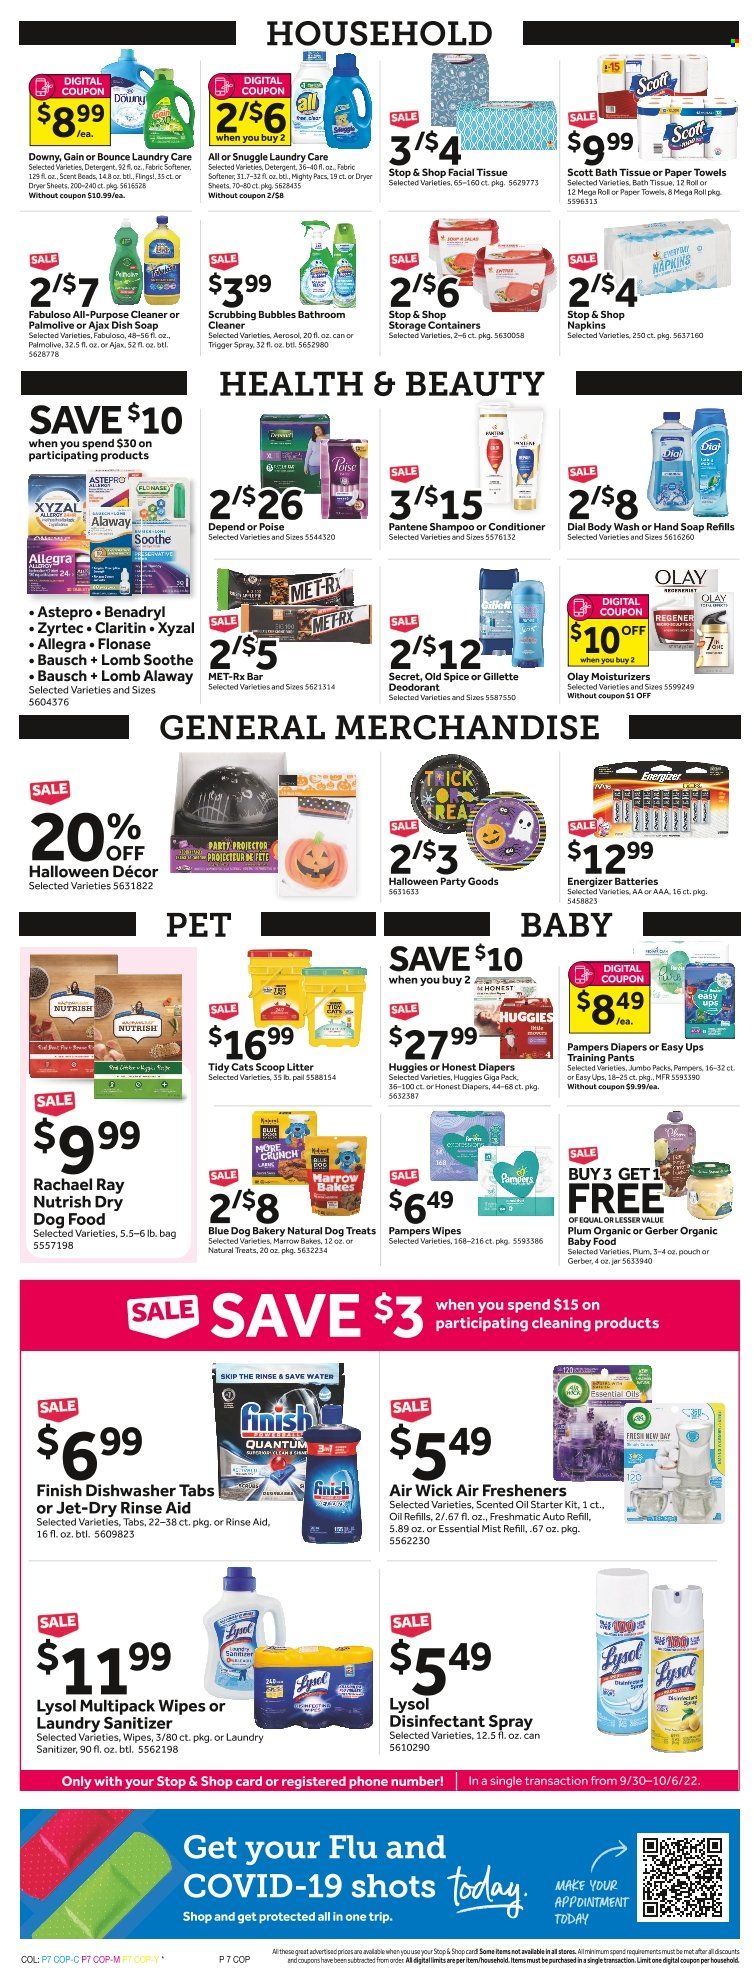 thumbnail - Stop & Shop Flyer - 09/30/2022 - 10/06/2022 - Sales products - Gerber, spice, oil, organic baby food, wipes, Huggies, Pampers, pants, napkins, nappies, baby pants, bath tissue, Scott, kitchen towels, paper towels, detergent, Gain, Scrubbing Bubbles, cleaner, desinfection, Lysol, Ajax, Fabuloso, Snuggle, fabric softener, Bounce, dryer sheets, Finish Powerball, Finish Quantum Ultimate, Jet, body wash, shampoo, hand soap, Old Spice, Palmolive, Dial, soap, moisturizer, Olay, conditioner, Pantene, anti-perspirant, deodorant, Gillette, antibacterial spray, storage box, air freshener, Air Wick, scented oil, essential oils, battery, Energizer, animal food, dry dog food, dog food, Nutrish, Zyrtec. Page 7.